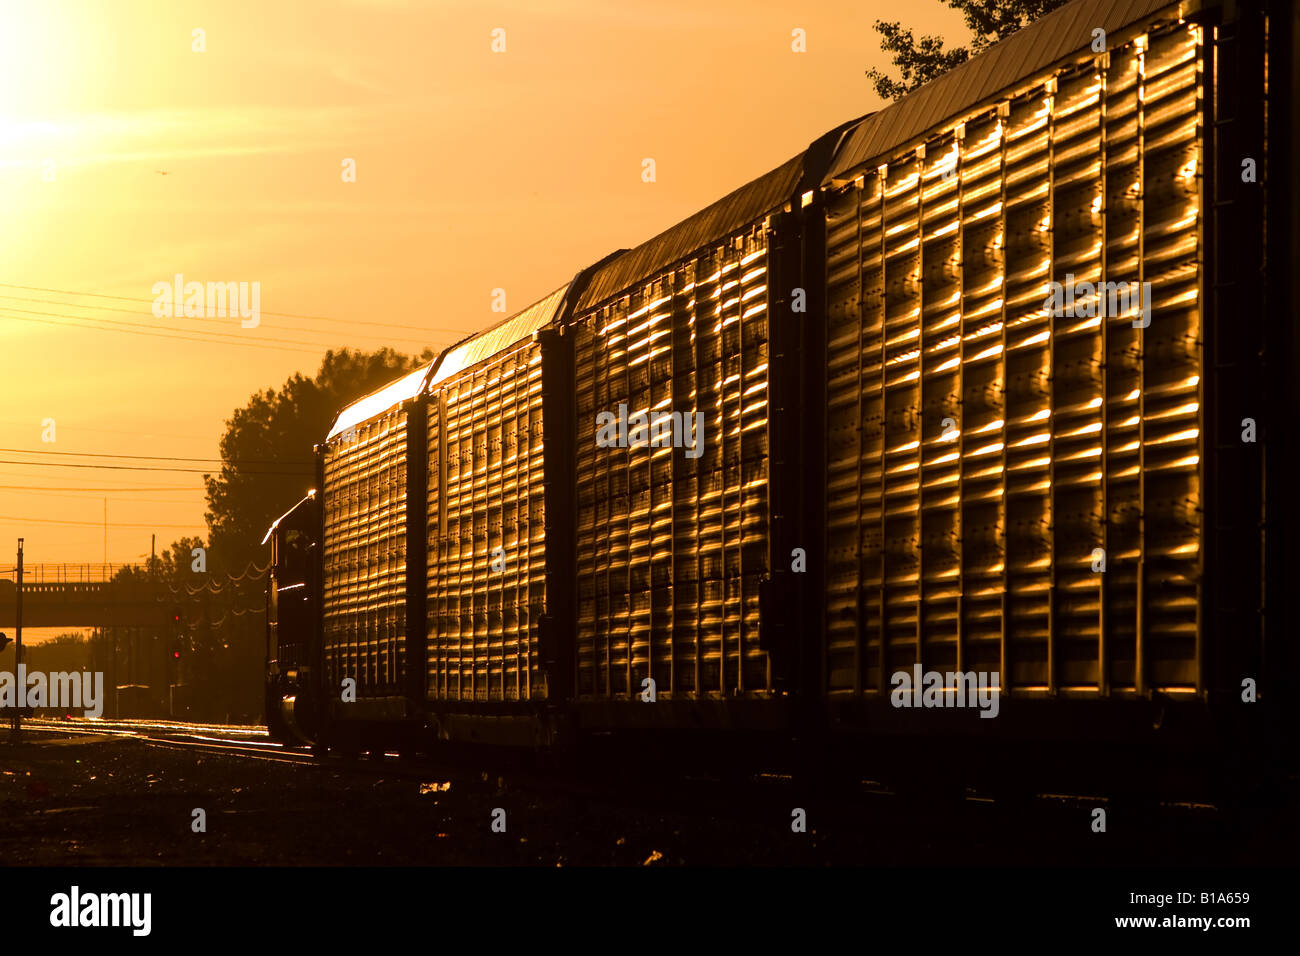 A westbound auto train heads into the setting sun. Stock Photo